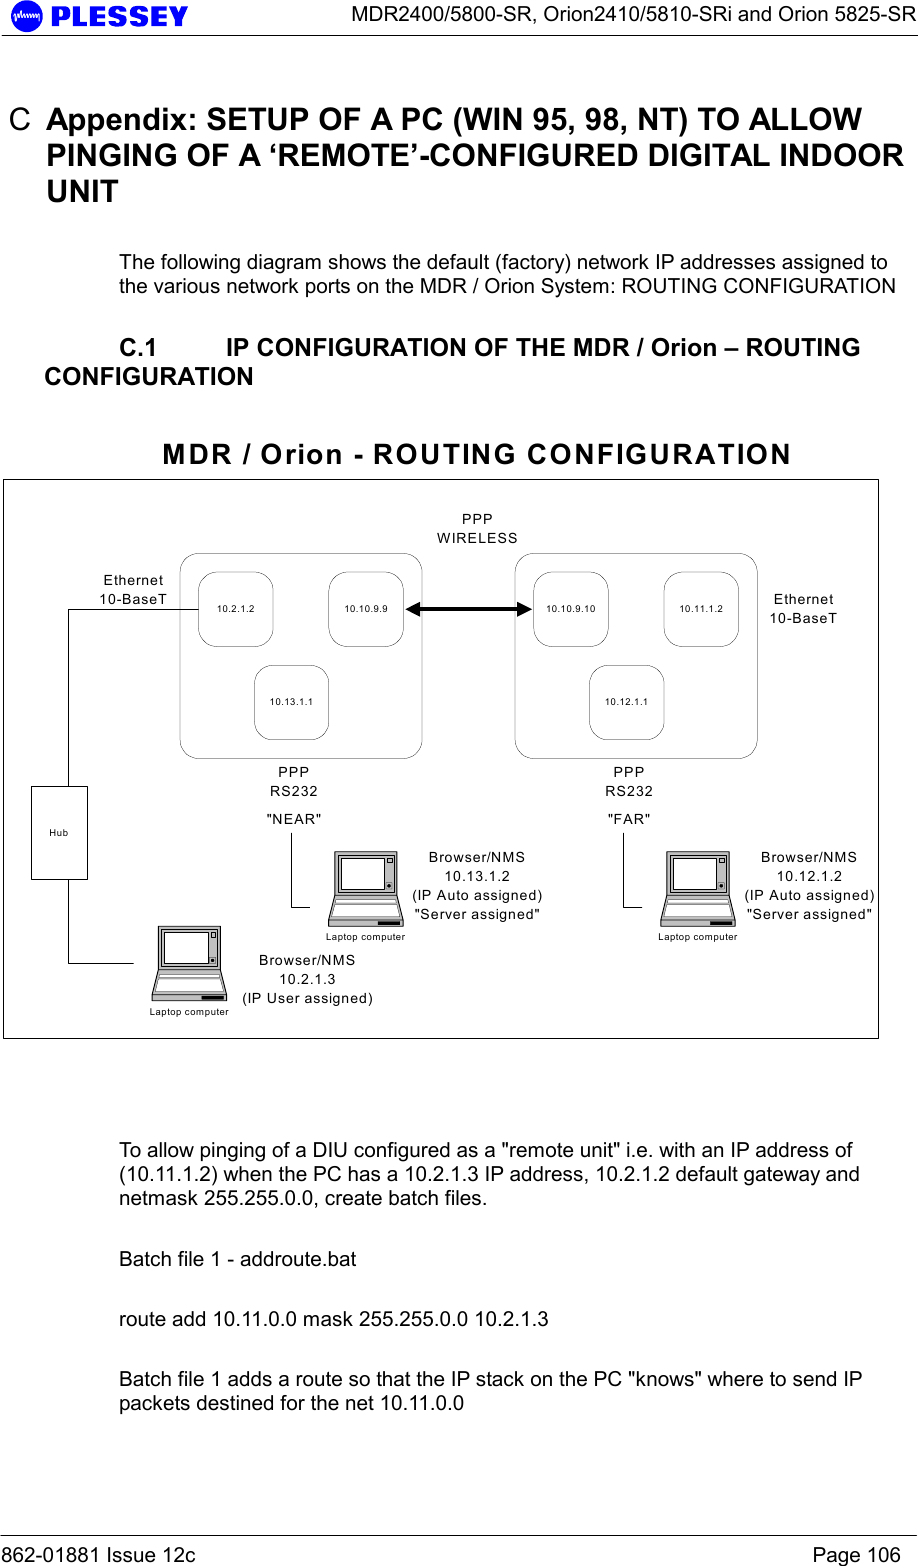      MDR2400/5800-SR, Orion2410/5810-SRi and Orion 5825-SR  862-01881 Issue 12c    Page 106 C  Appendix: SETUP OF A PC (WIN 95, 98, NT) TO ALLOW PINGING OF A ‘REMOTE’-CONFIGURED DIGITAL INDOOR UNIT  The following diagram shows the default (factory) network IP addresses assigned to the various network ports on the MDR / Orion System: ROUTING CONFIGURATION    C.1  IP CONFIGURATION OF THE MDR / Orion – ROUTING CONFIGURATION  10.2.1.2 10.10.9.910.13.1.110.10.9.10 10.11.1.210.12.1.1Ethernet10-BaseTPPPRS232PPPWIRELESSPPPRS232Ethernet10-BaseT&quot;NEAR&quot; &quot;FAR&quot;Laptop computerBrowser/NMS10.2.1.3(IP User assigned)HubMDR / Orion - ROUTING CONFIGURATIONLaptop computerBrowser/NMS10.12.1.2(IP Auto assigned)&quot;Server assigned&quot;Laptop computerBrowser/NMS10.13.1.2(IP Auto assigned)&quot;Server assigned&quot;    To allow pinging of a DIU configured as a &quot;remote unit&quot; i.e. with an IP address of (10.11.1.2) when the PC has a 10.2.1.3 IP address, 10.2.1.2 default gateway and netmask 255.255.0.0, create batch files.    Batch file 1 - addroute.bat  route add 10.11.0.0 mask 255.255.0.0 10.2.1.3  Batch file 1 adds a route so that the IP stack on the PC &quot;knows&quot; where to send IP packets destined for the net 10.11.0.0   